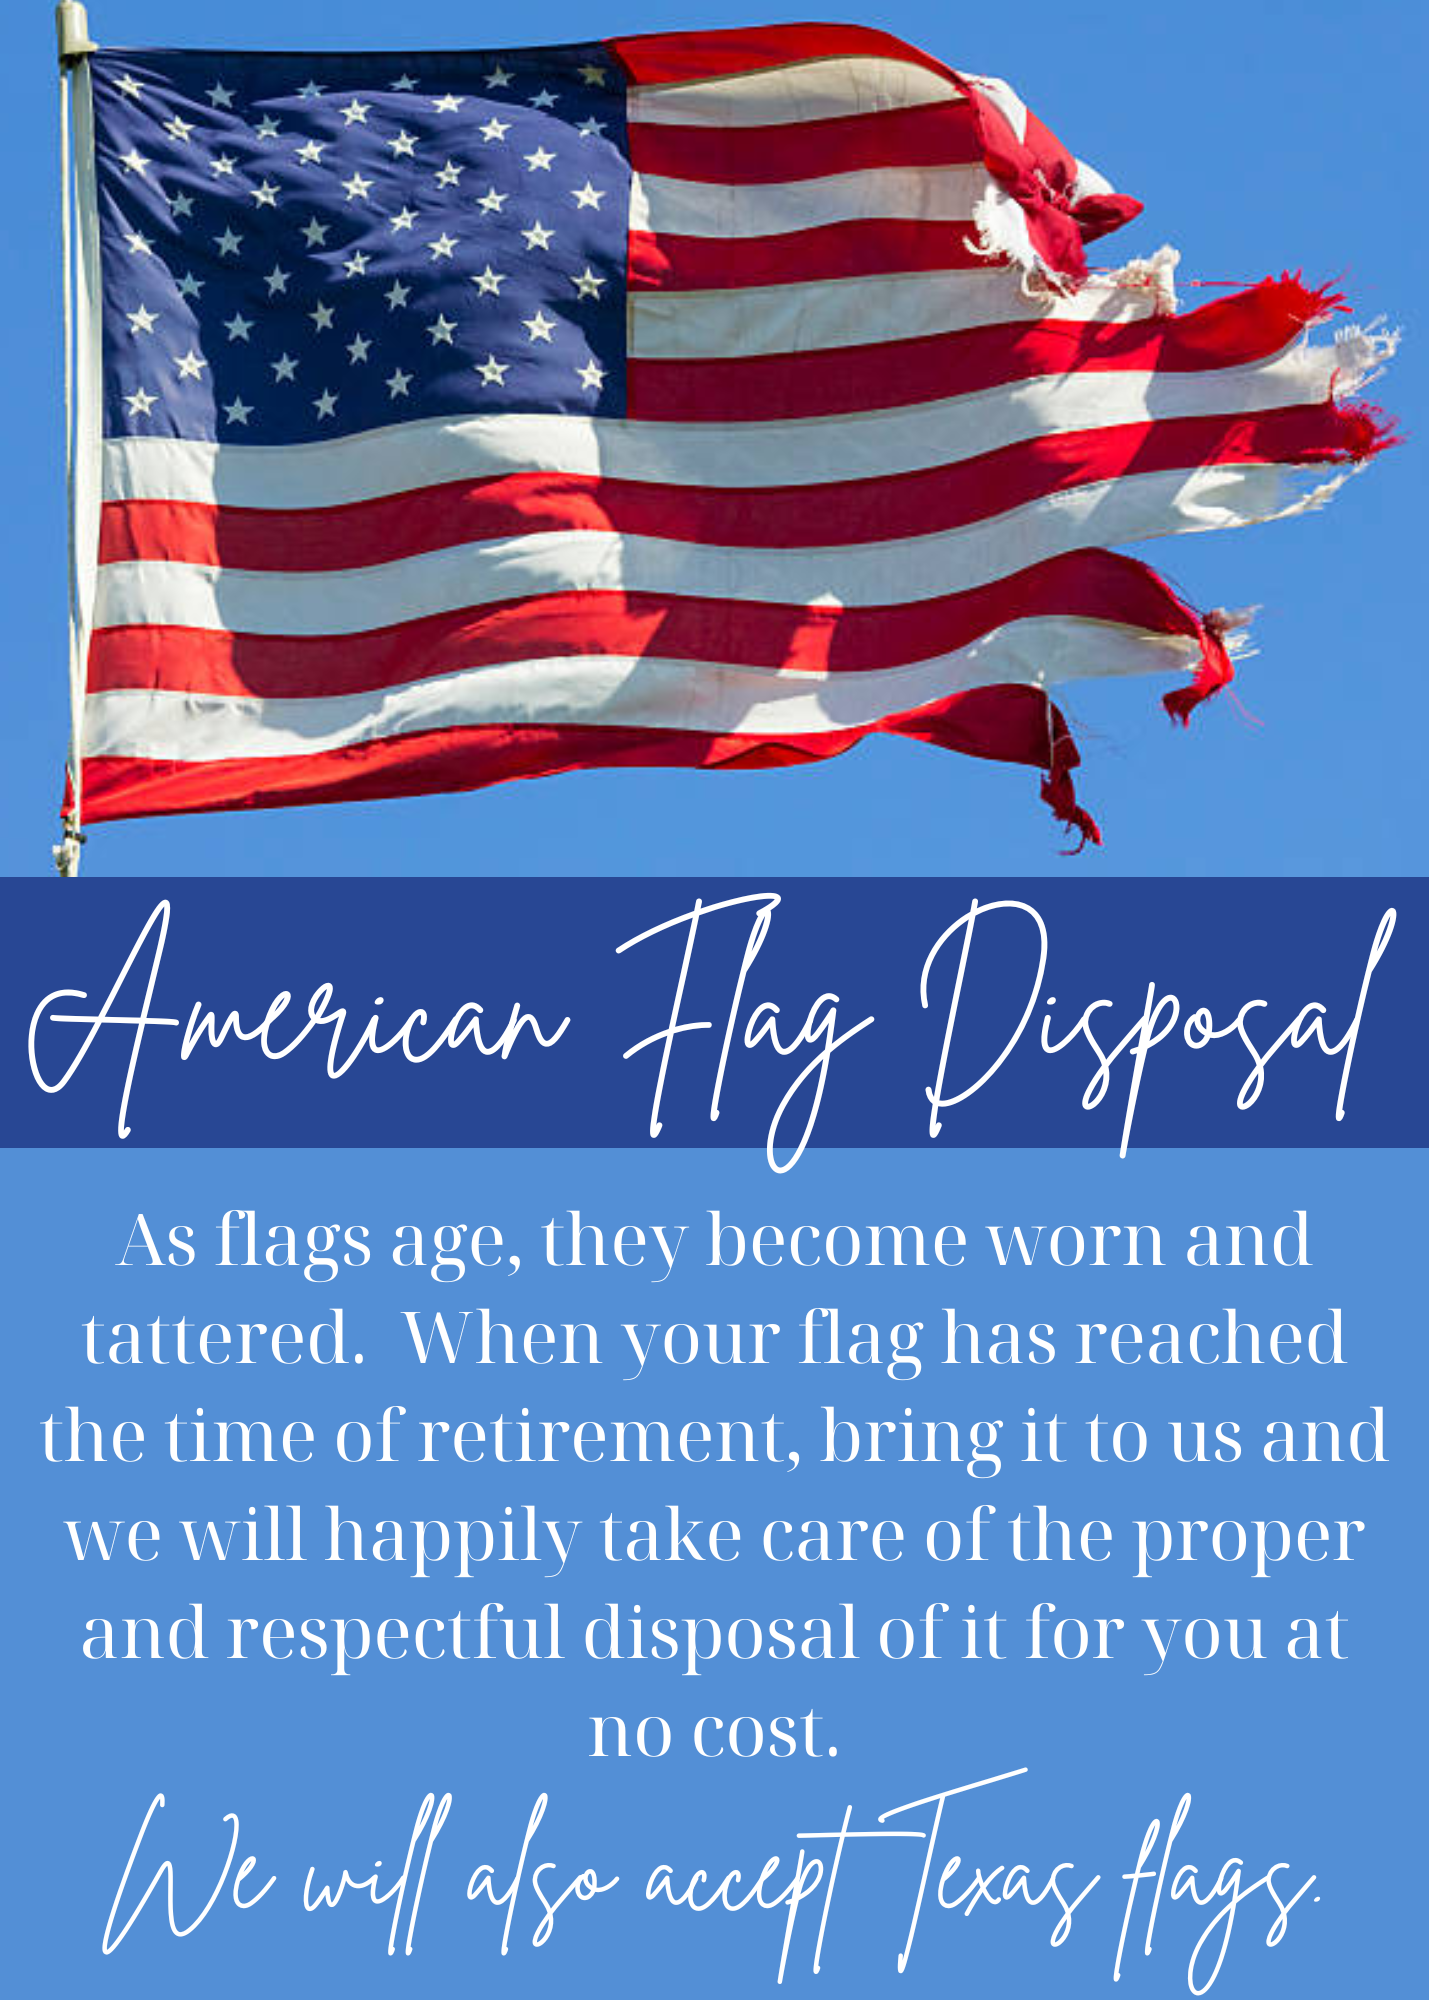 An american flag is flying in the wind with a quote about american flag disposal.